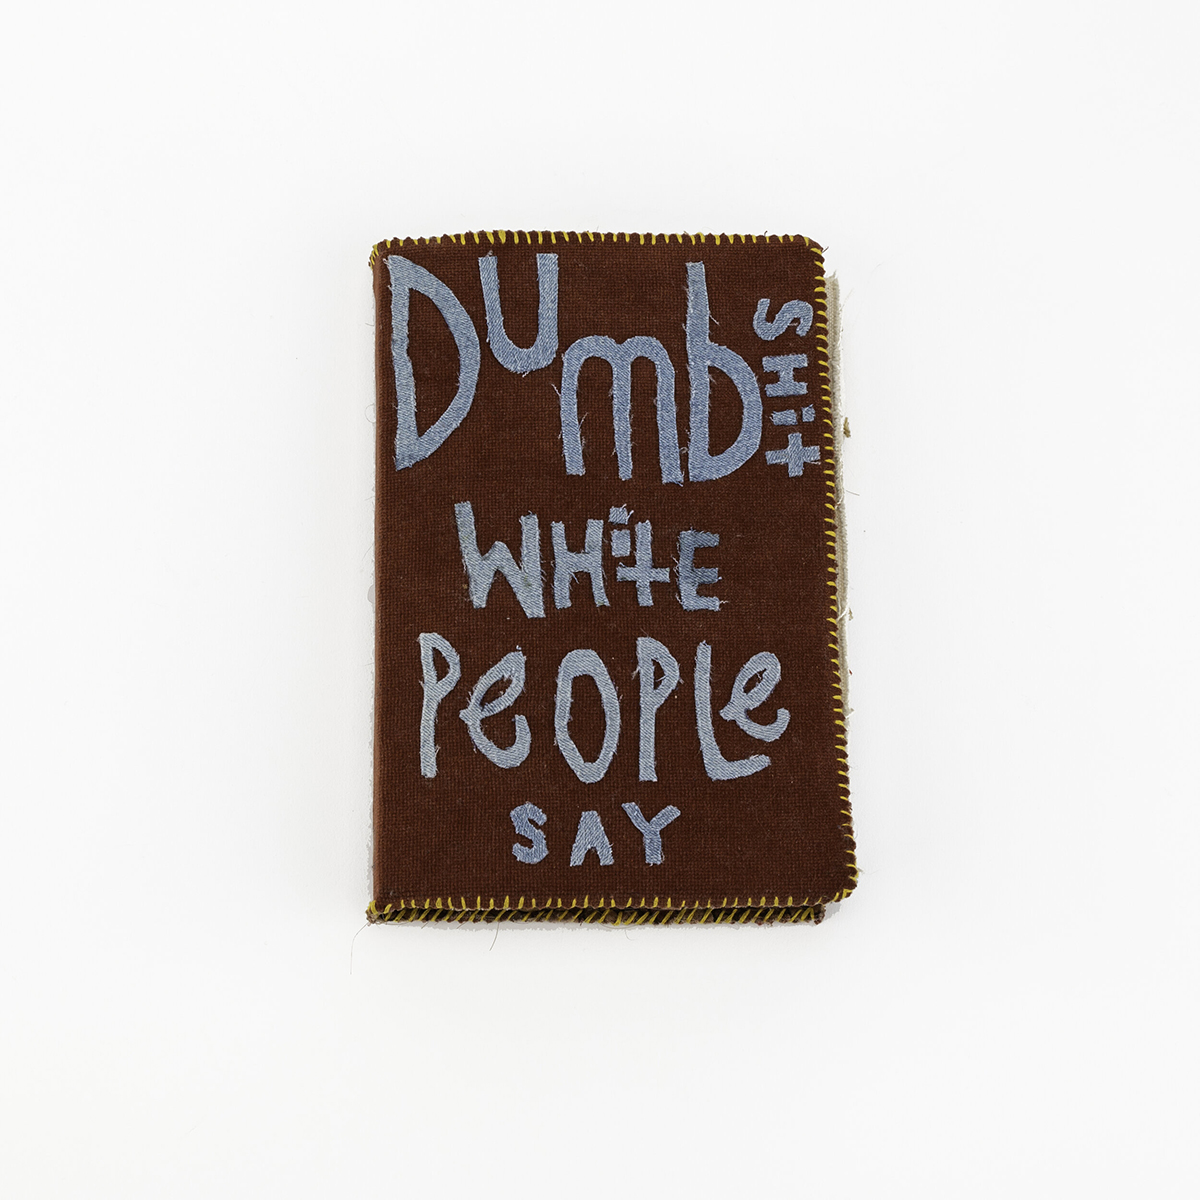 Handbound book with stitched binding and fabric scrap lettering, text reads, 'Dumb shit white people say'